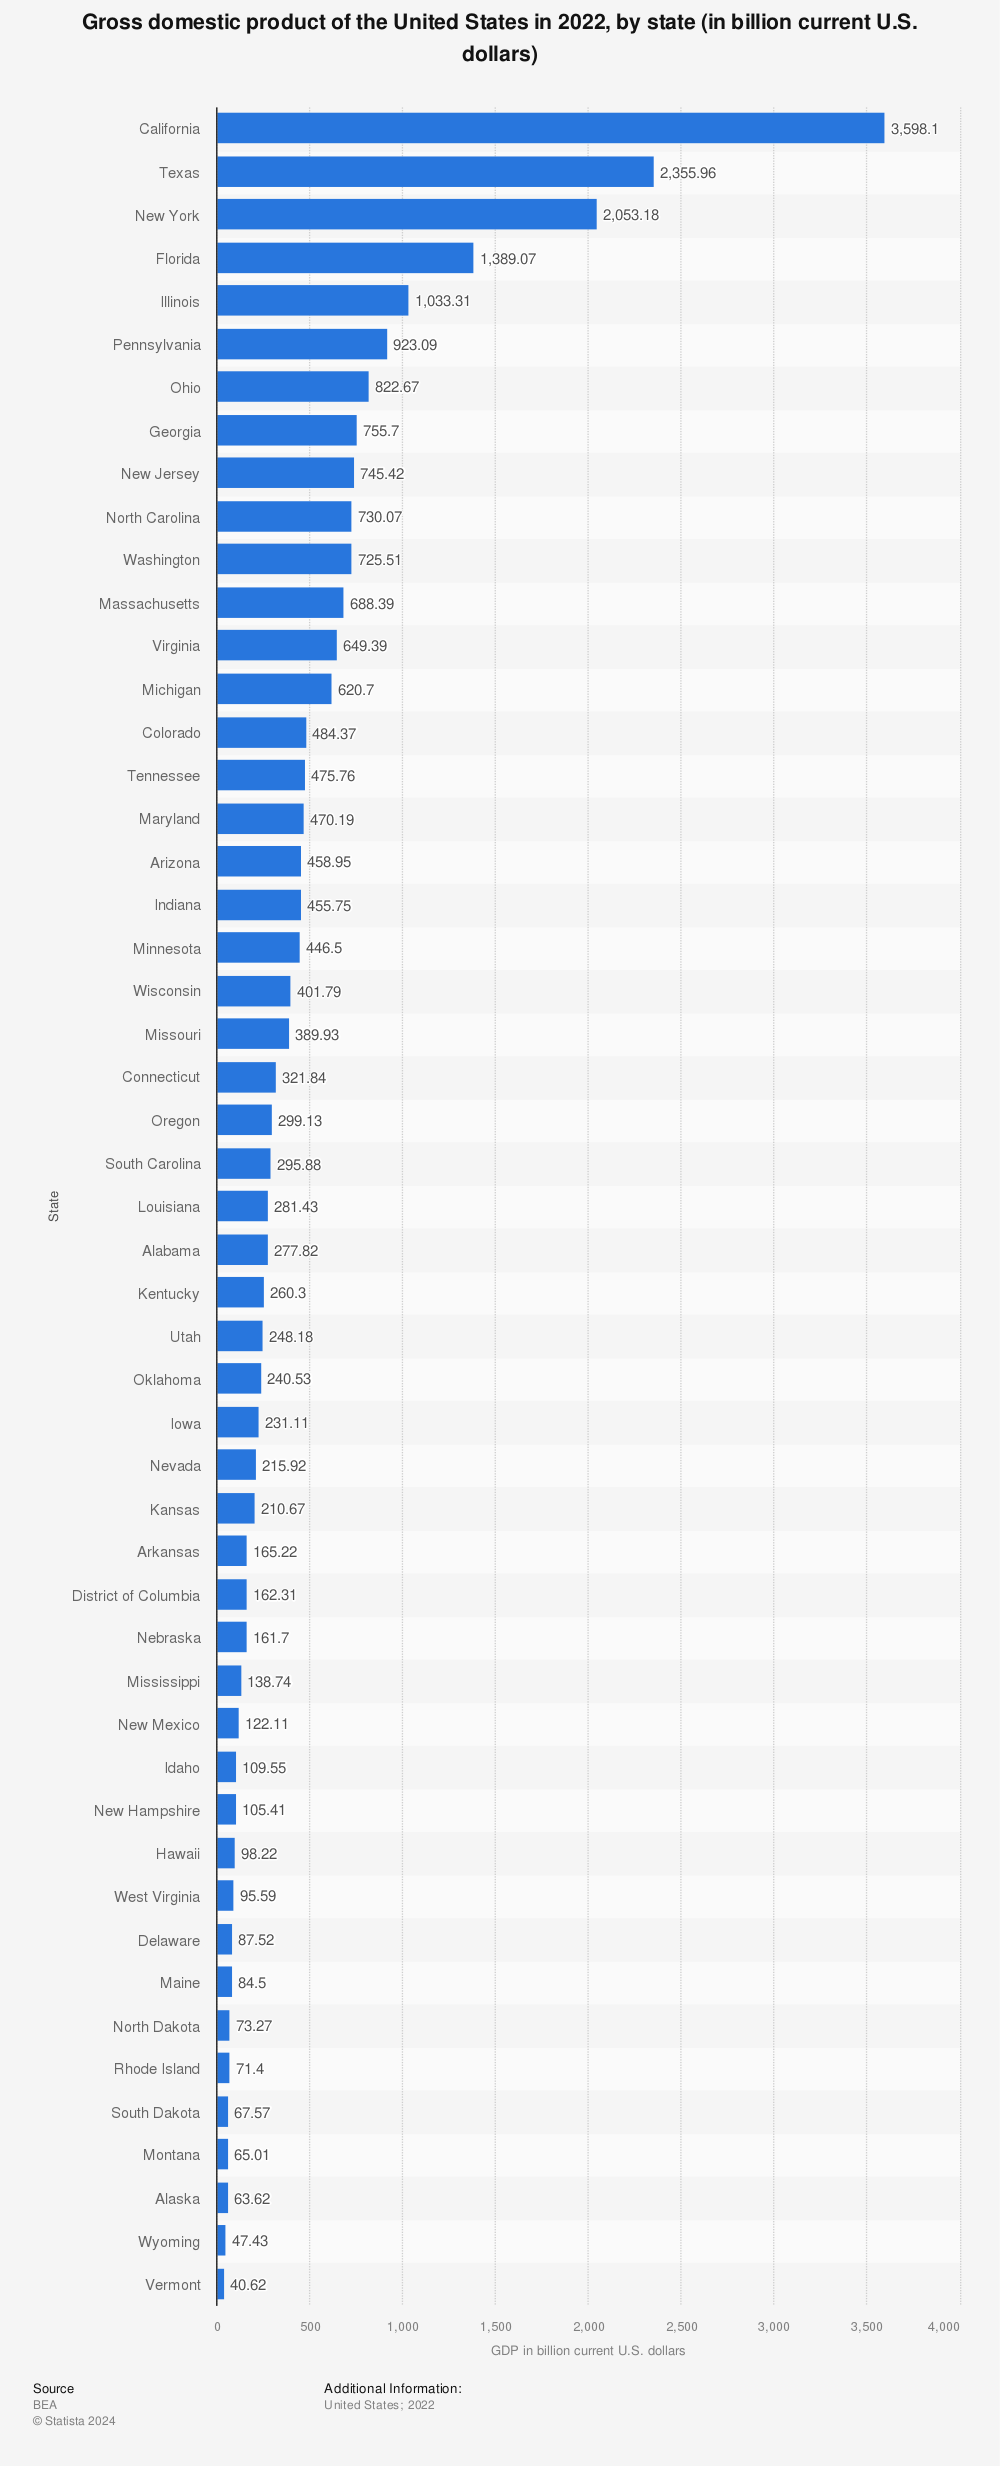 Statistic: Gross Domestic Product (GDP) of the United States in 2020, by state (in billion current U.S. dollars) | Statista